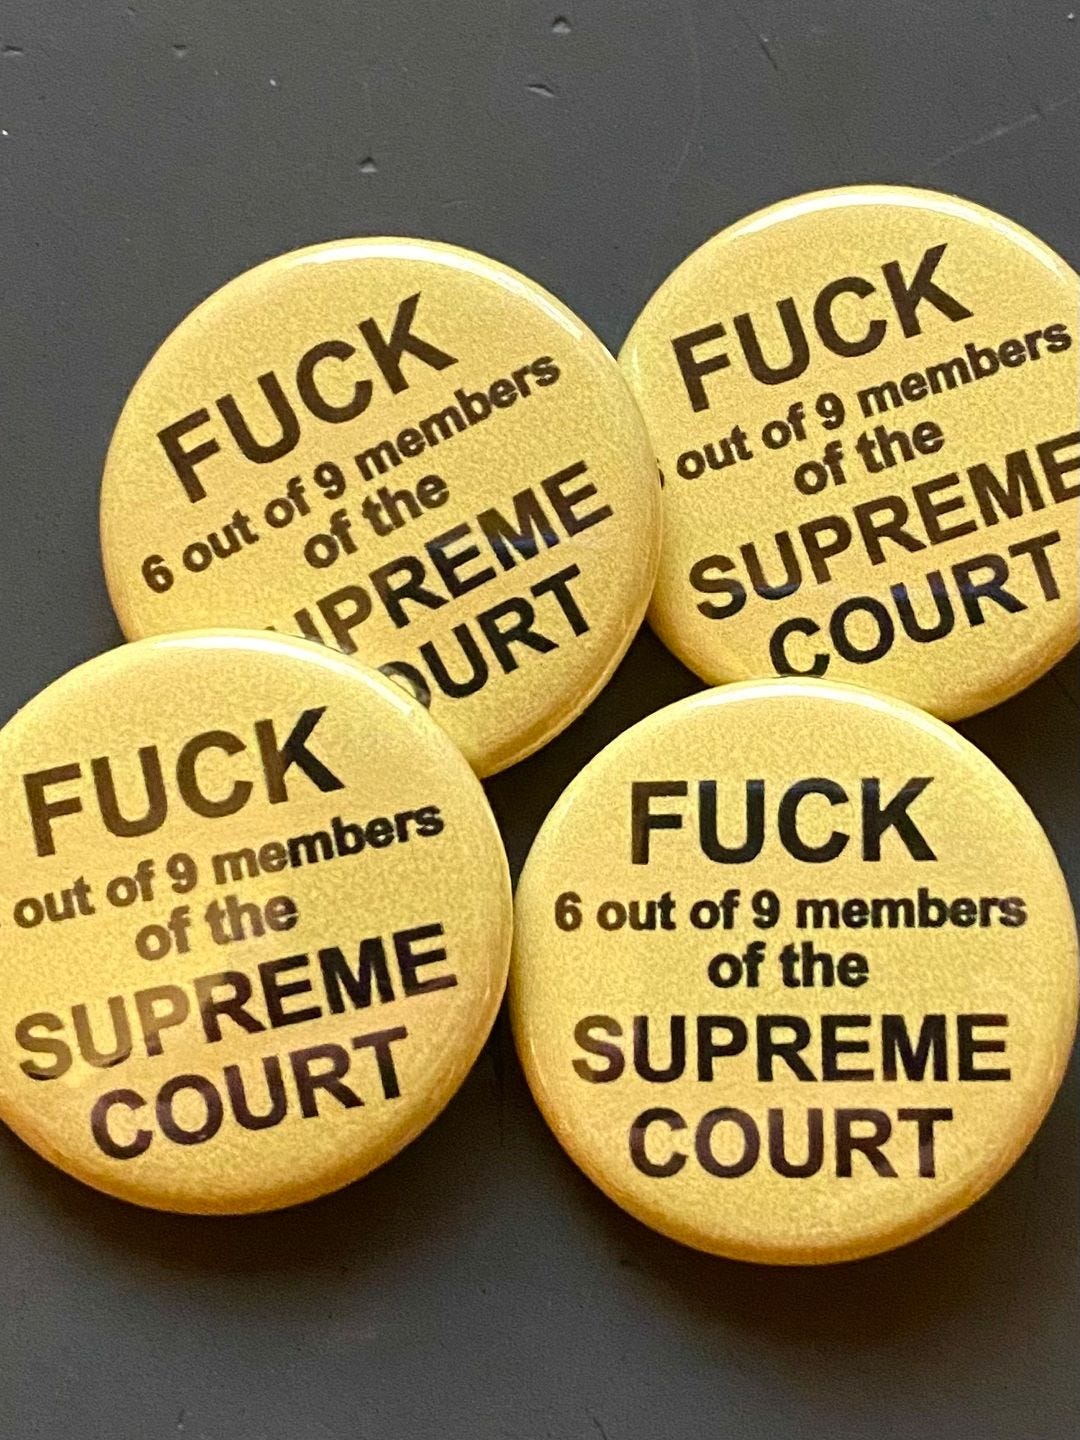 May be an image of text that says 'FUCK members FUCK SUPREME of9 out of 9 members members of the 6out of9 out PREME of ofthe the OURT COURT COURT FUCK members FUCK out of SUPREME the of 9 6 out of 9 members of the COURT SUPREME COURT'